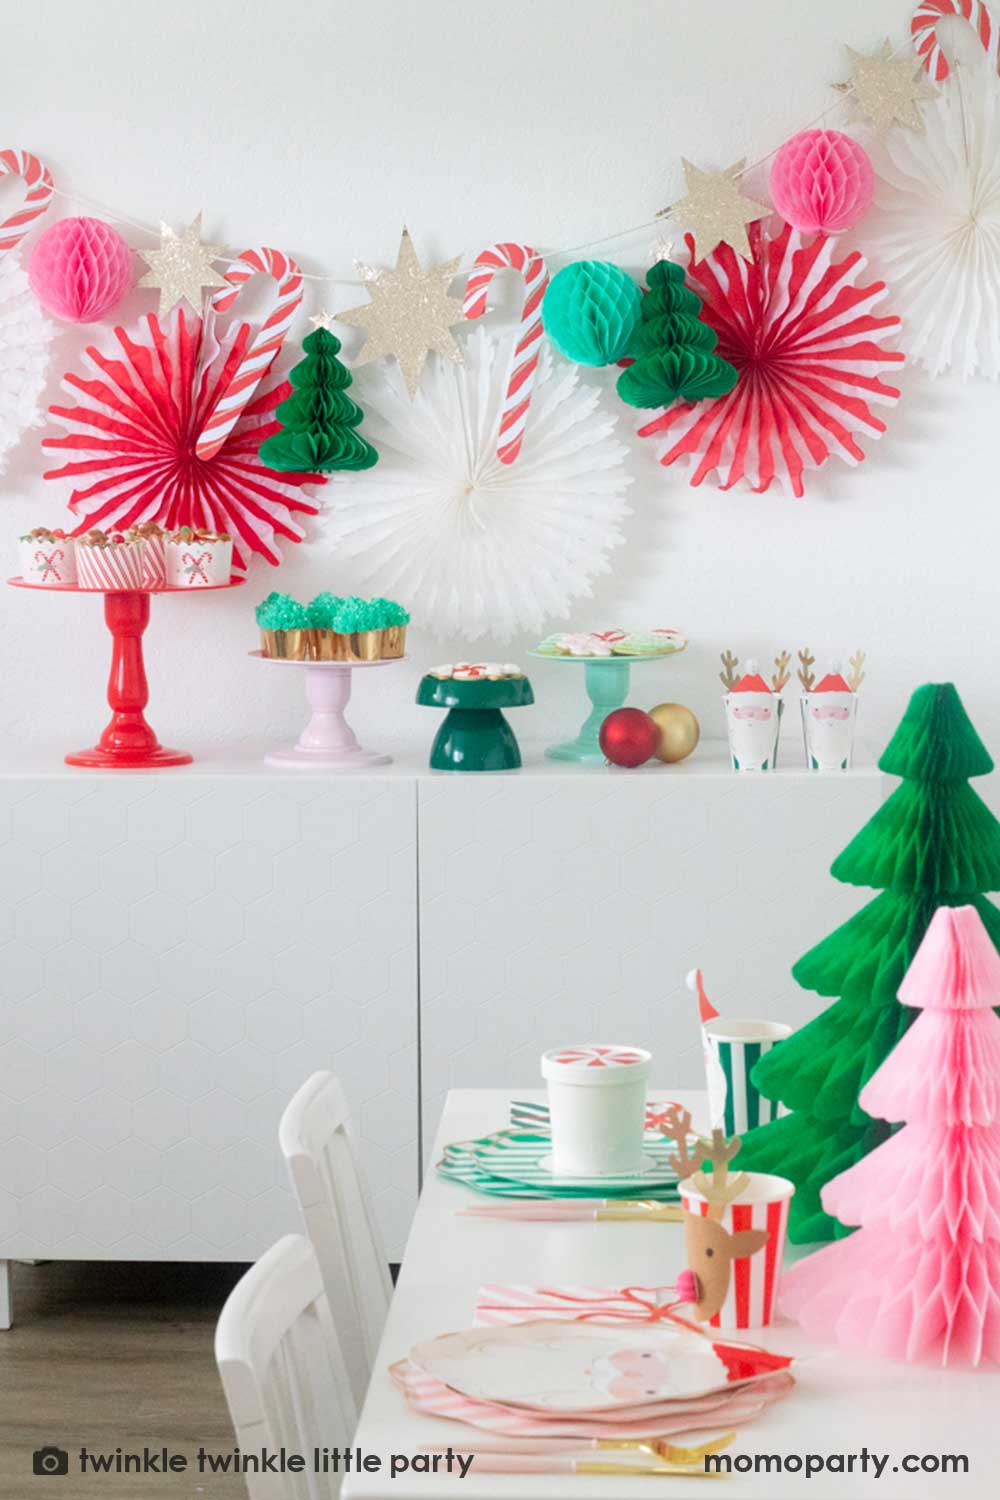 A Christmas party table featuring Momo Party's festive striped party tableware in pink red and green with Christmas tree honeycombs as the centerpiece. In the back is a Christmas dessert table decorated with Momo Party's Christmas honeycomb decorations featuring candy canes, honeycomb Christmas trees and mint honeycomb balls. On the table there are multiple cake stands in red, pink, green and mint with Holiday treats like cookies, cupcakes and baked food, making this a perfect Holiday party inspo.